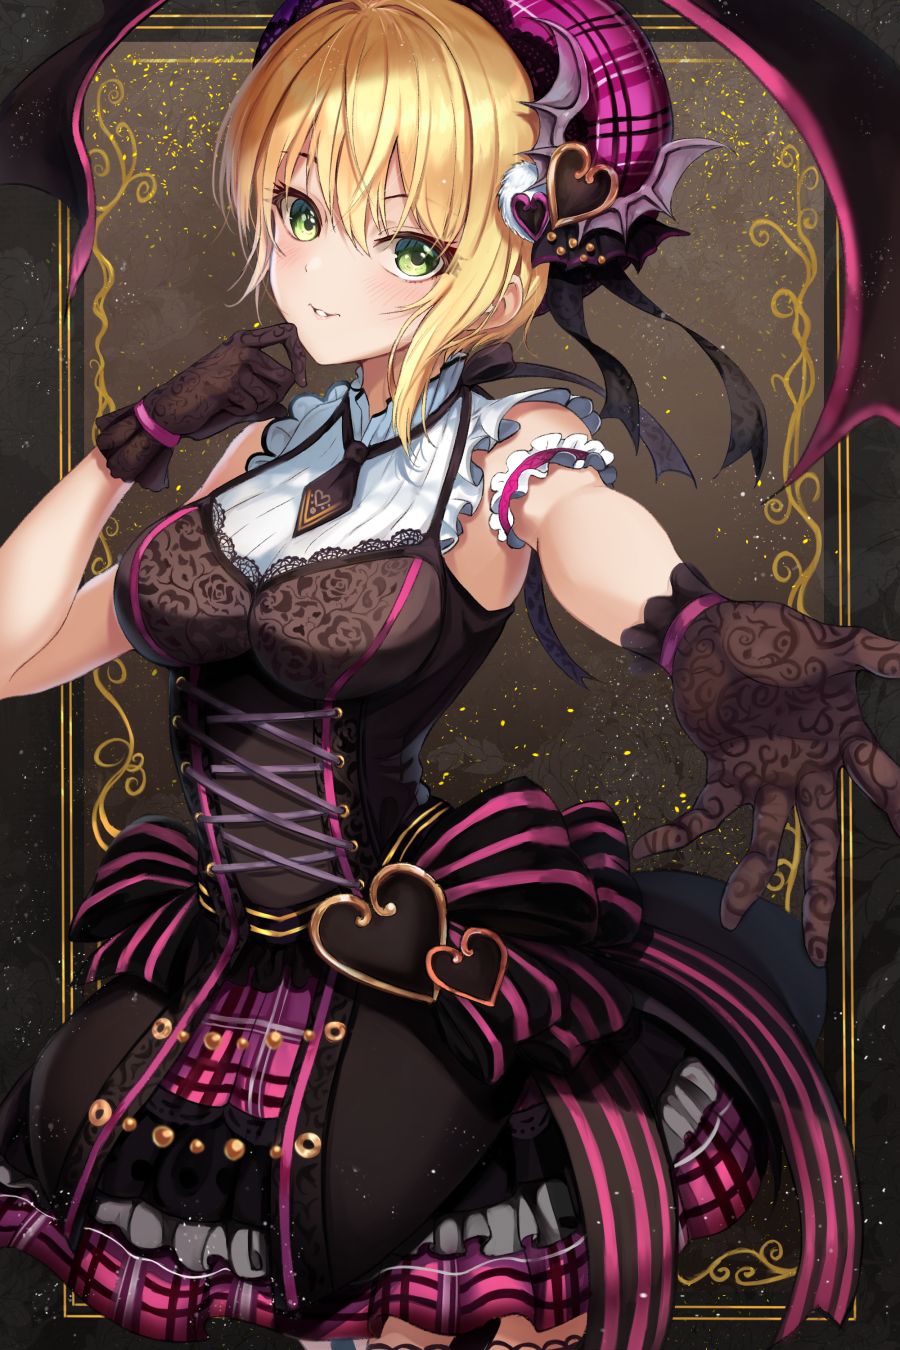 __miyamoto_frederica_idolmaster_and_2_more_drawn_by_nao_okt8538__dd8351e98cd5d68ef052280e4cc4421f.png